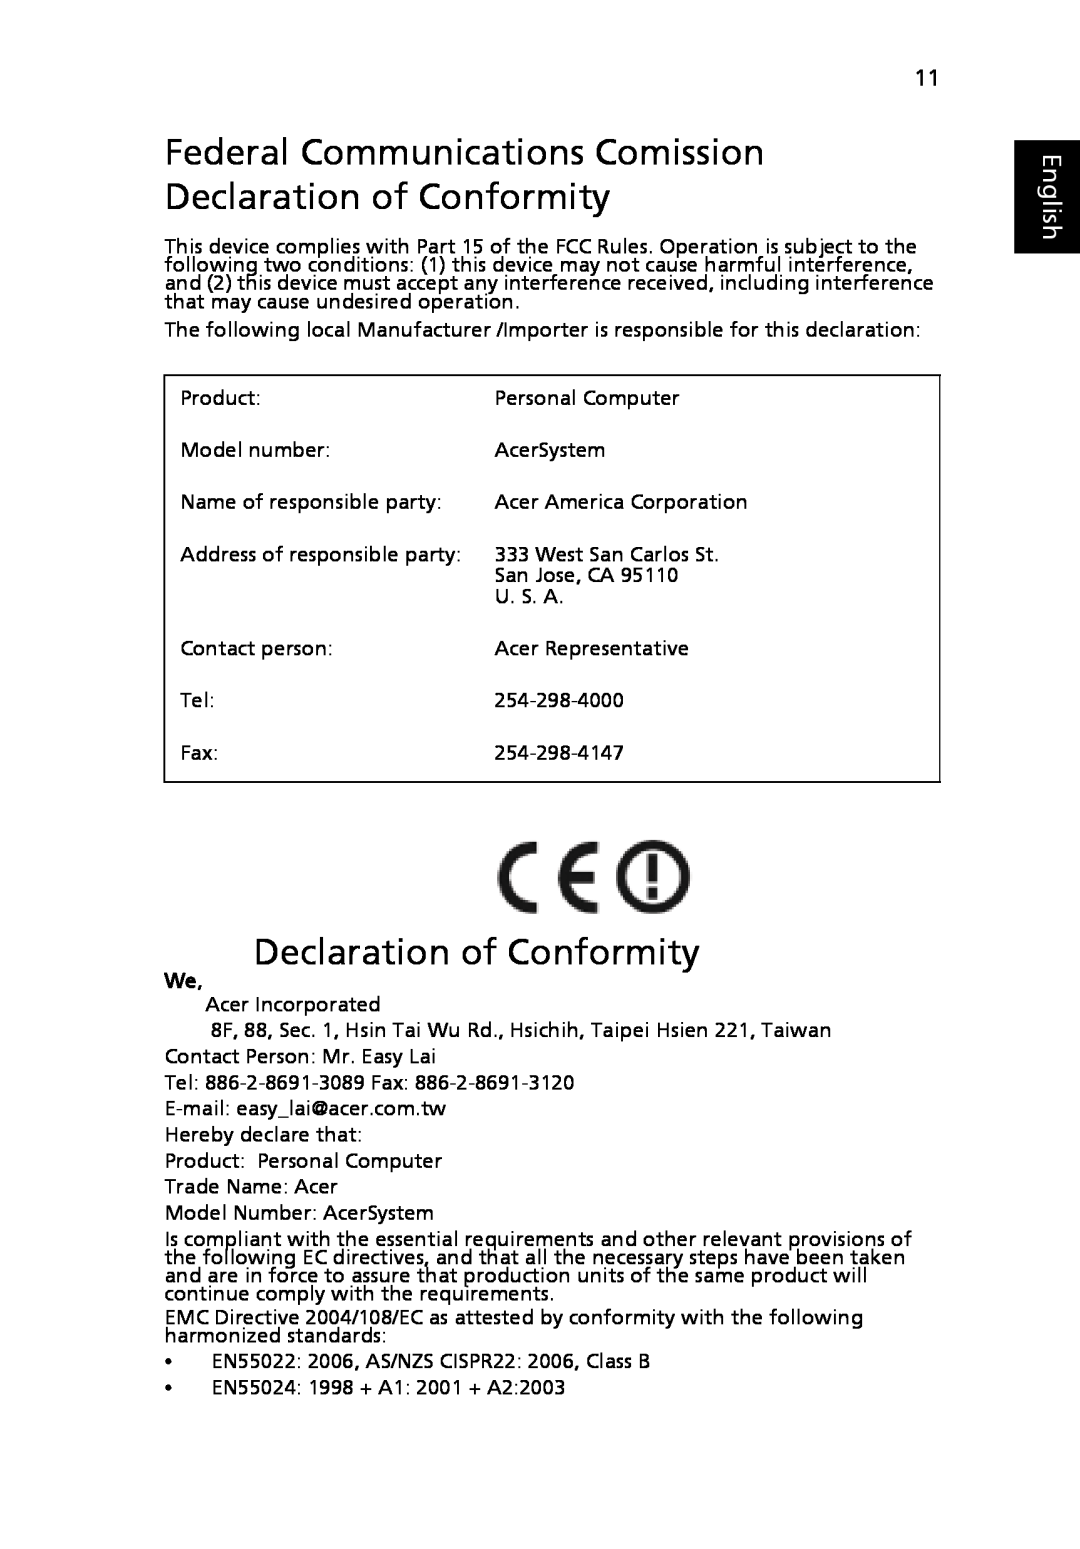 Acer N260G manual Federal Communications Comission Declaration of Conformity, English 